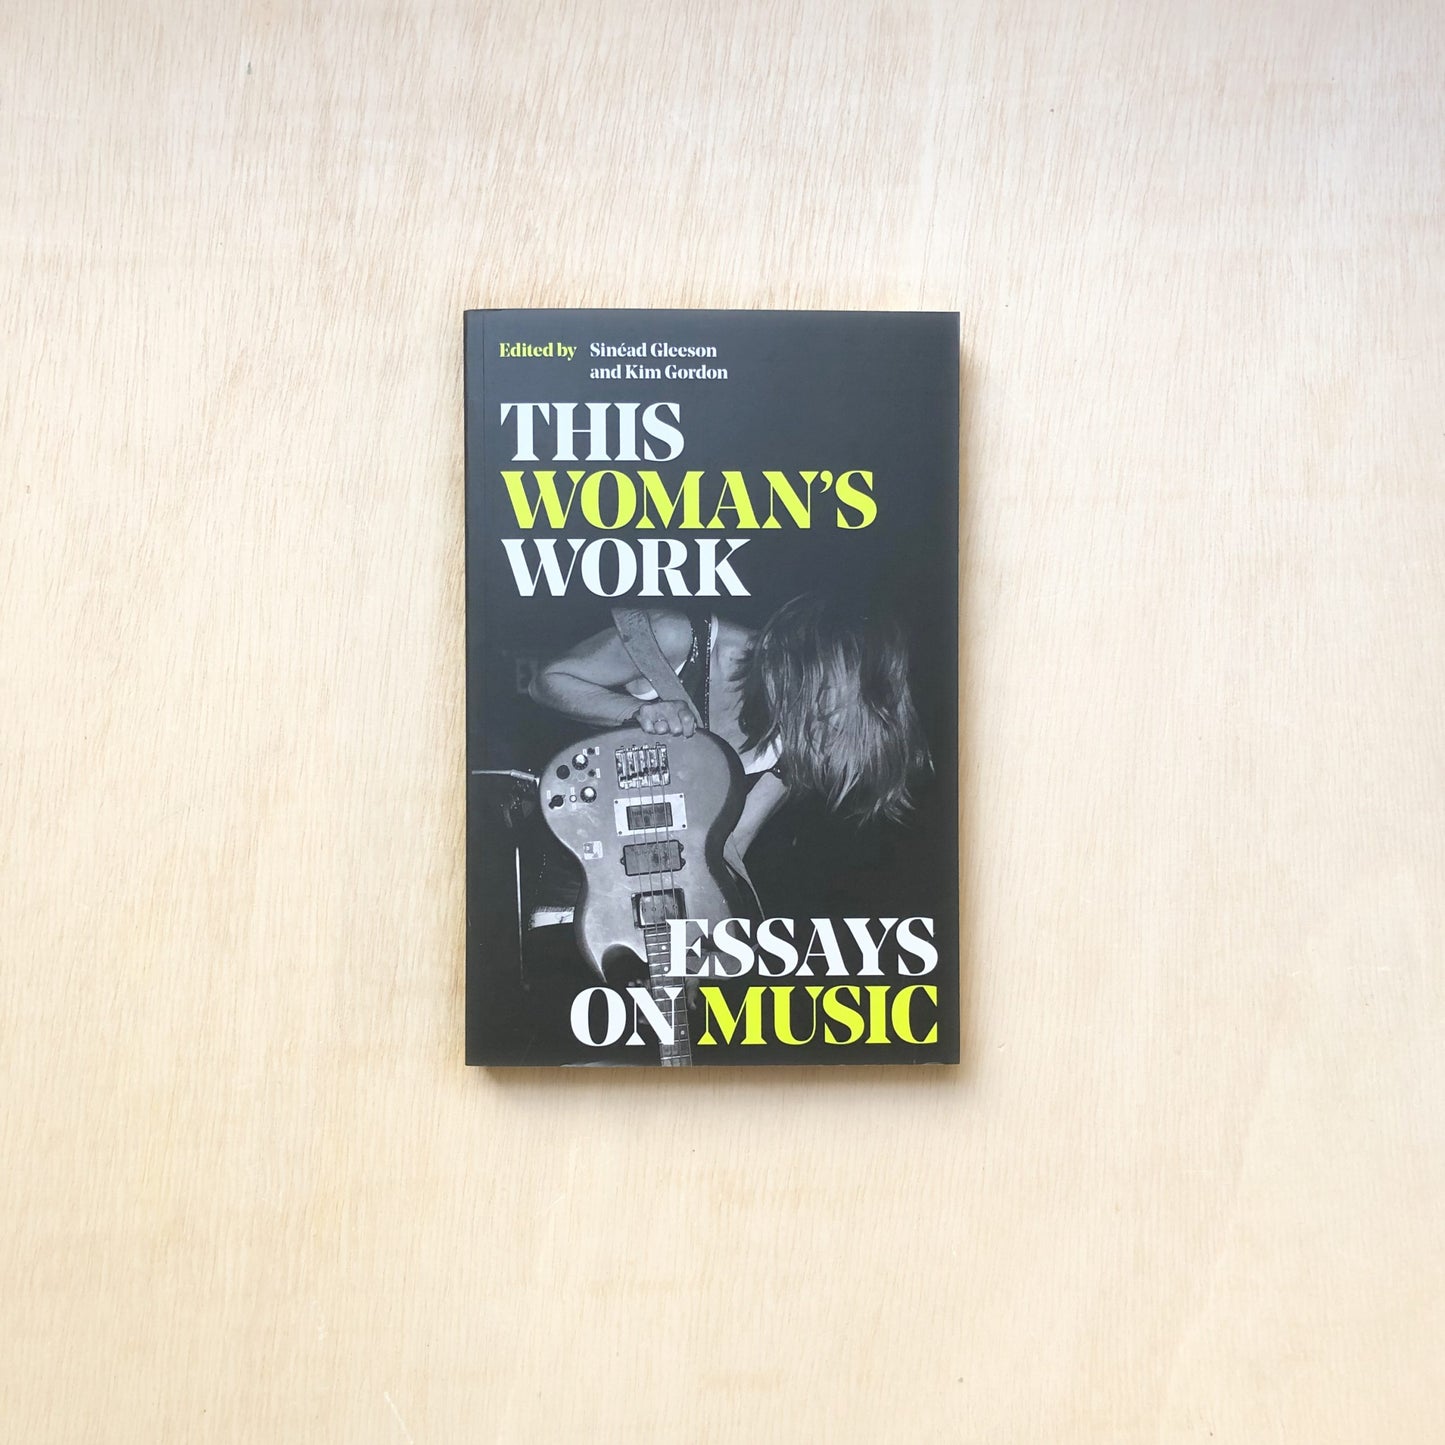 This Woman's Work - Essays on Music